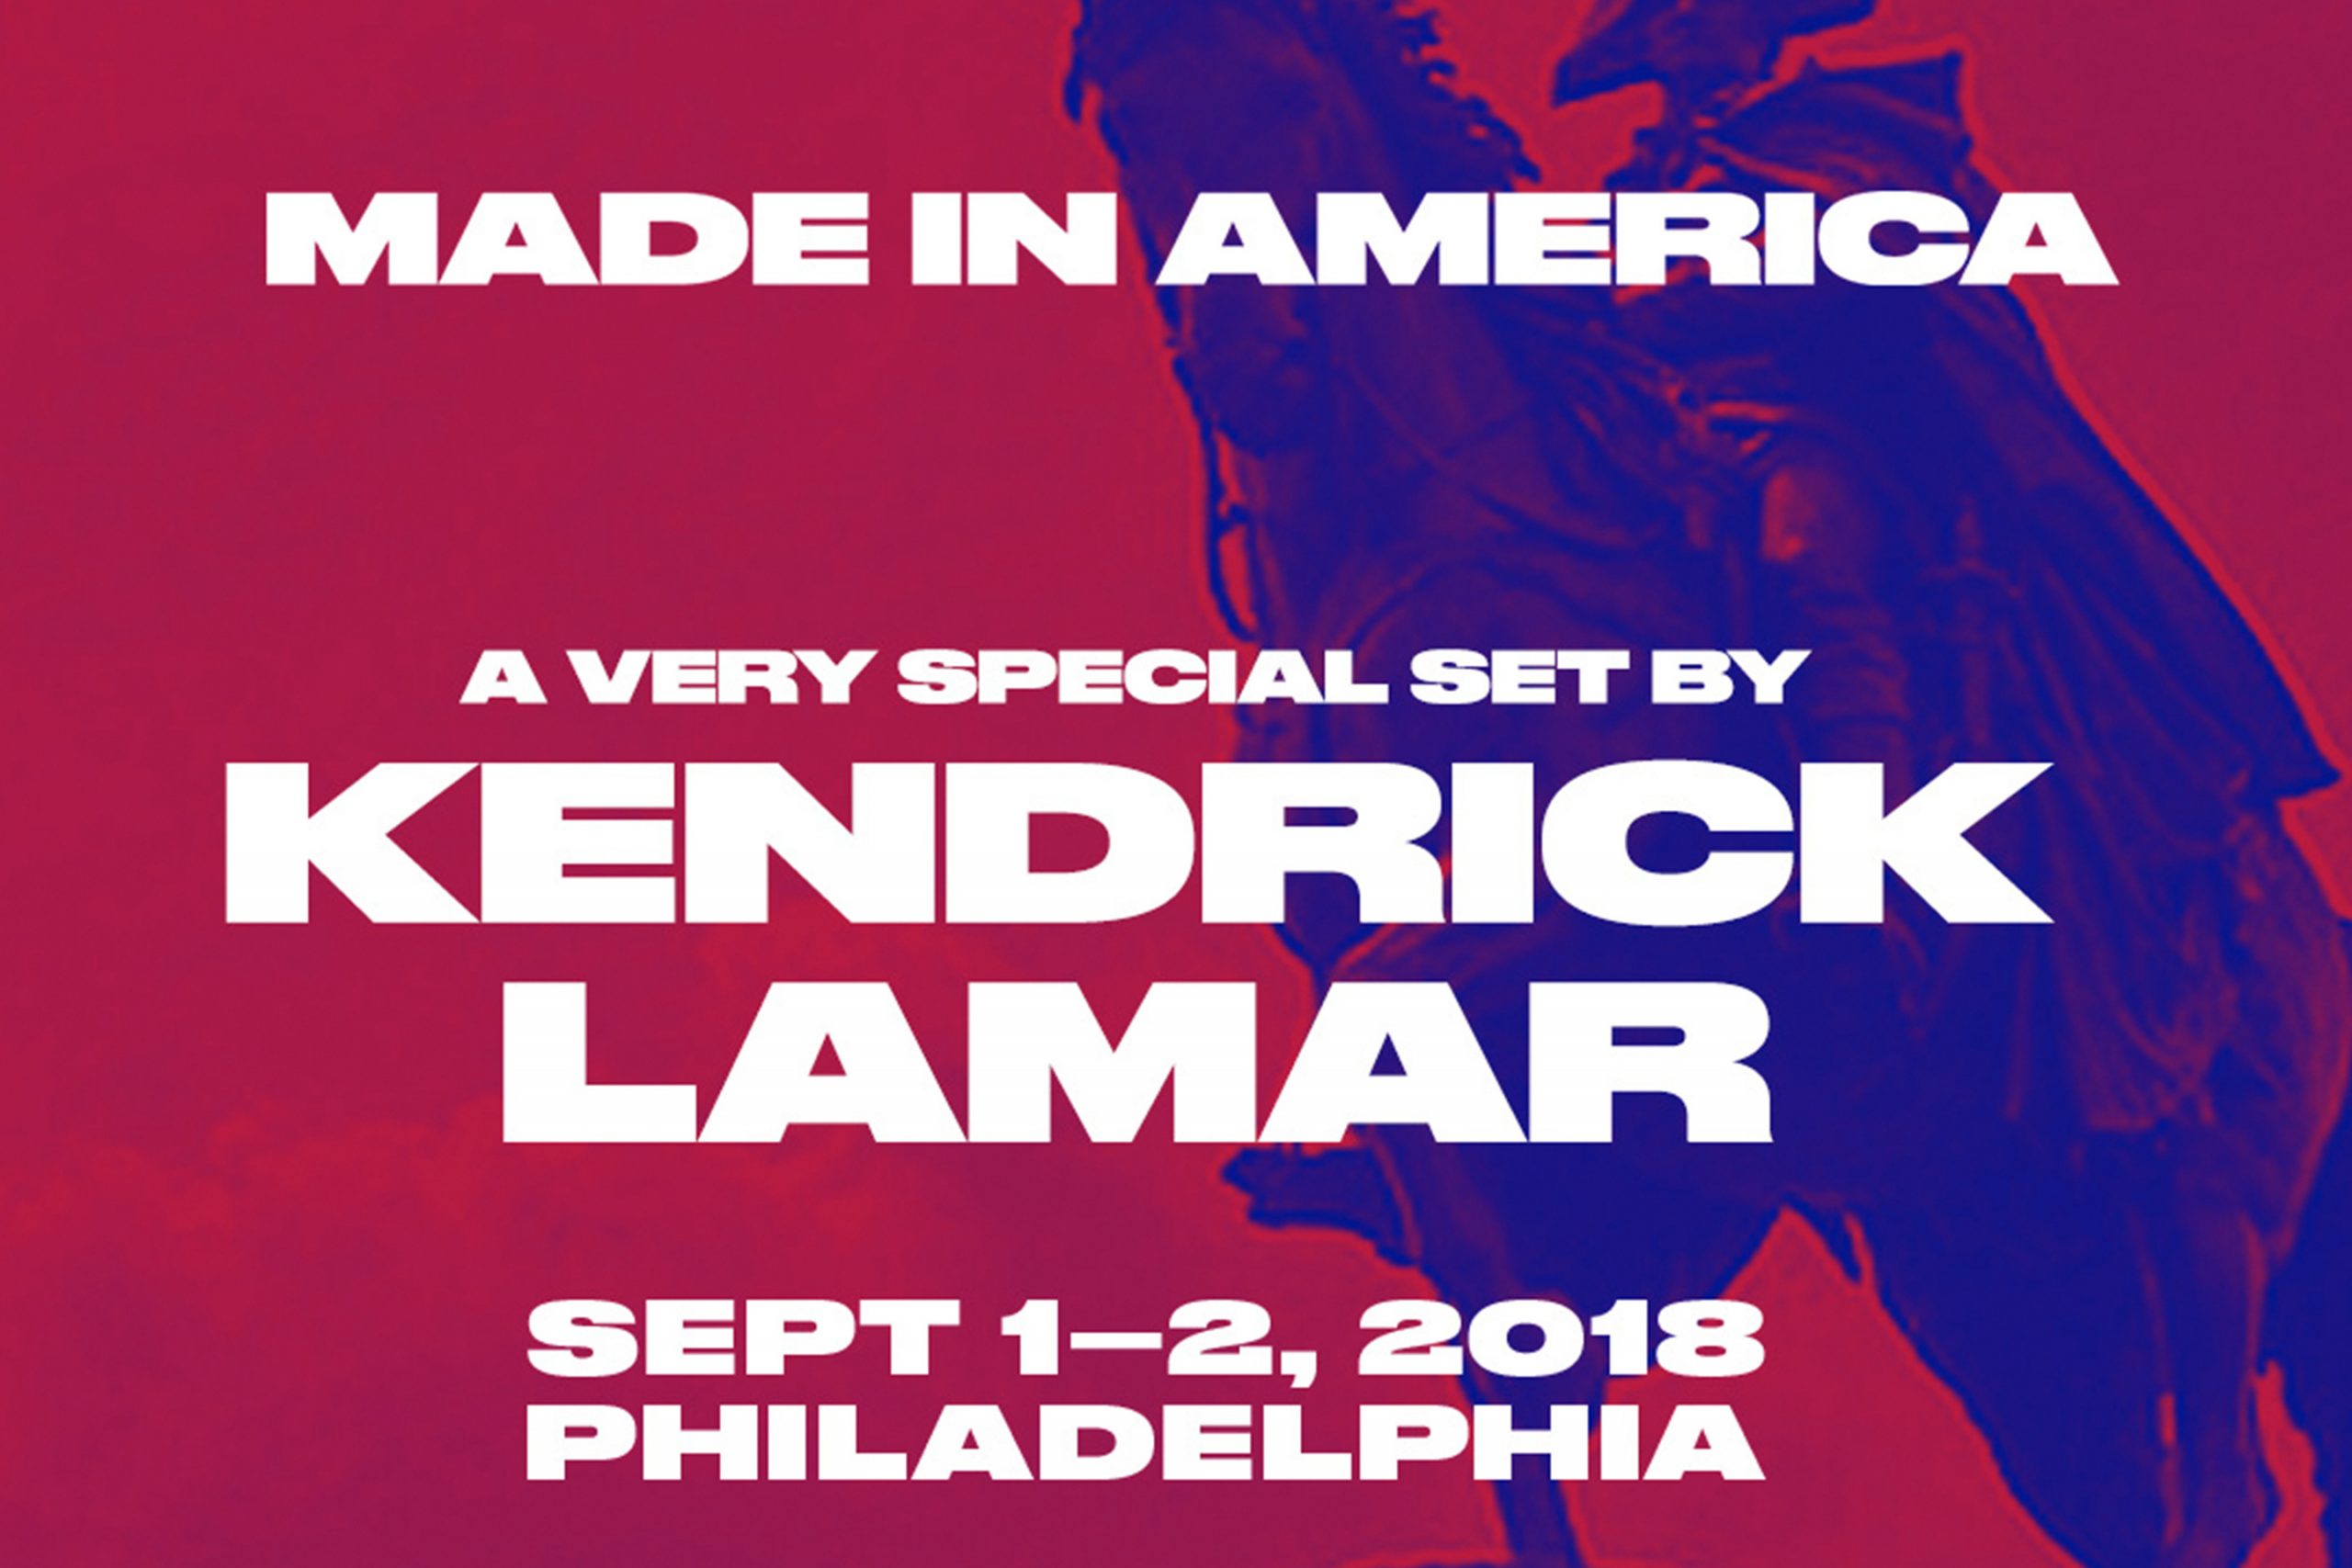 Welcome Kendrick Lamar to the 2018 MADE IN AMERICA poster